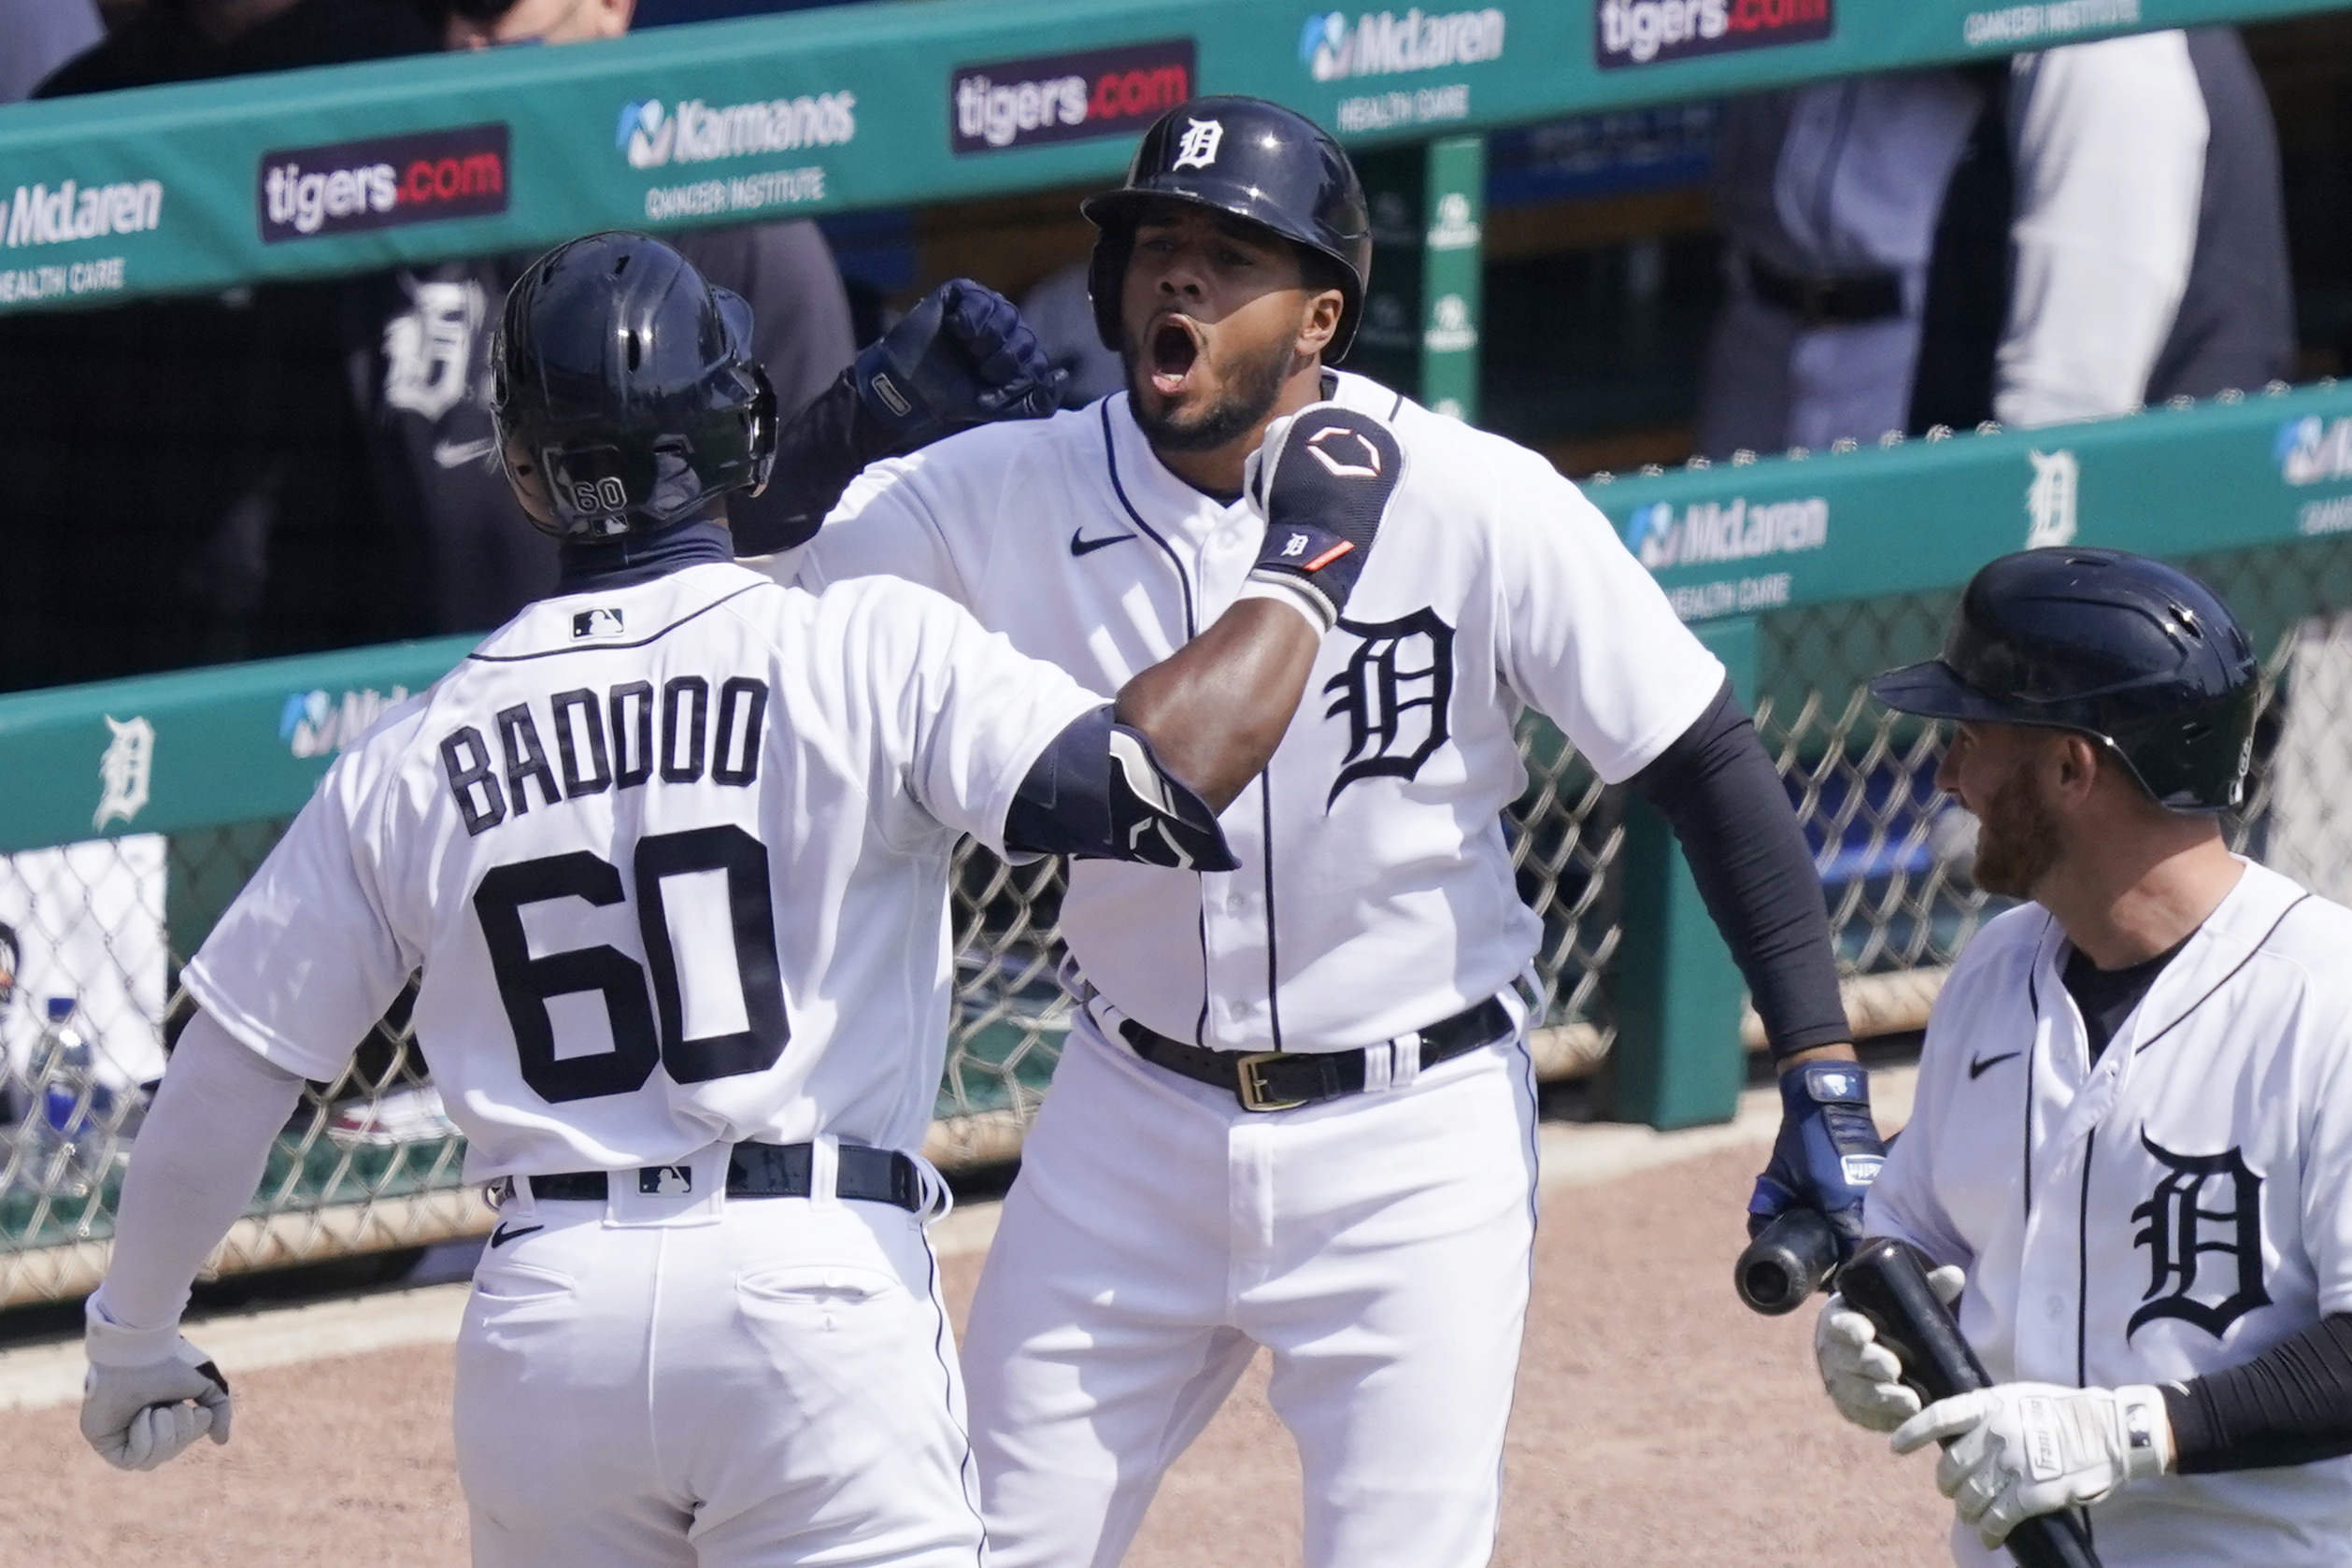 detroit tigers game online free